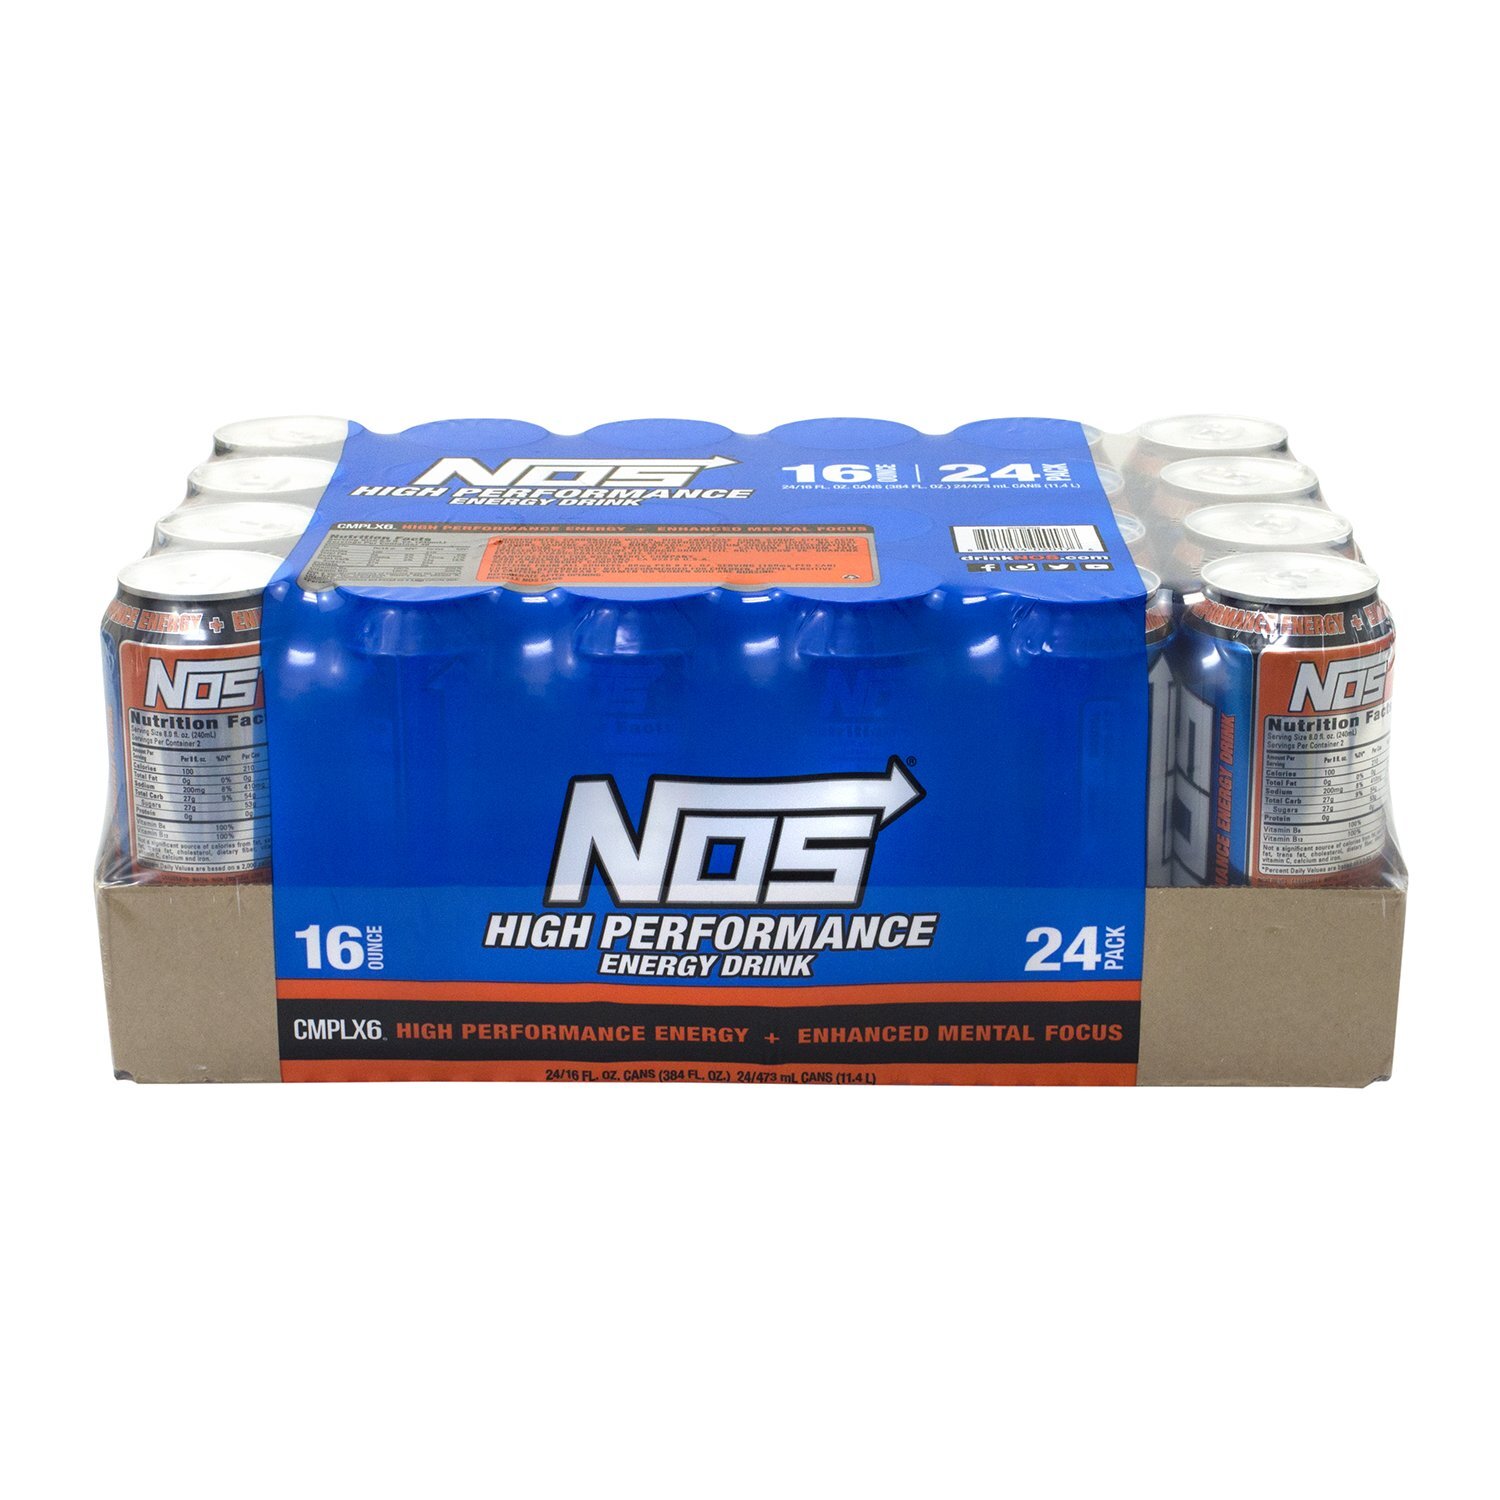 Energy performance. Nos Energy Drink. Energy Performance nature. Nos (Drink).